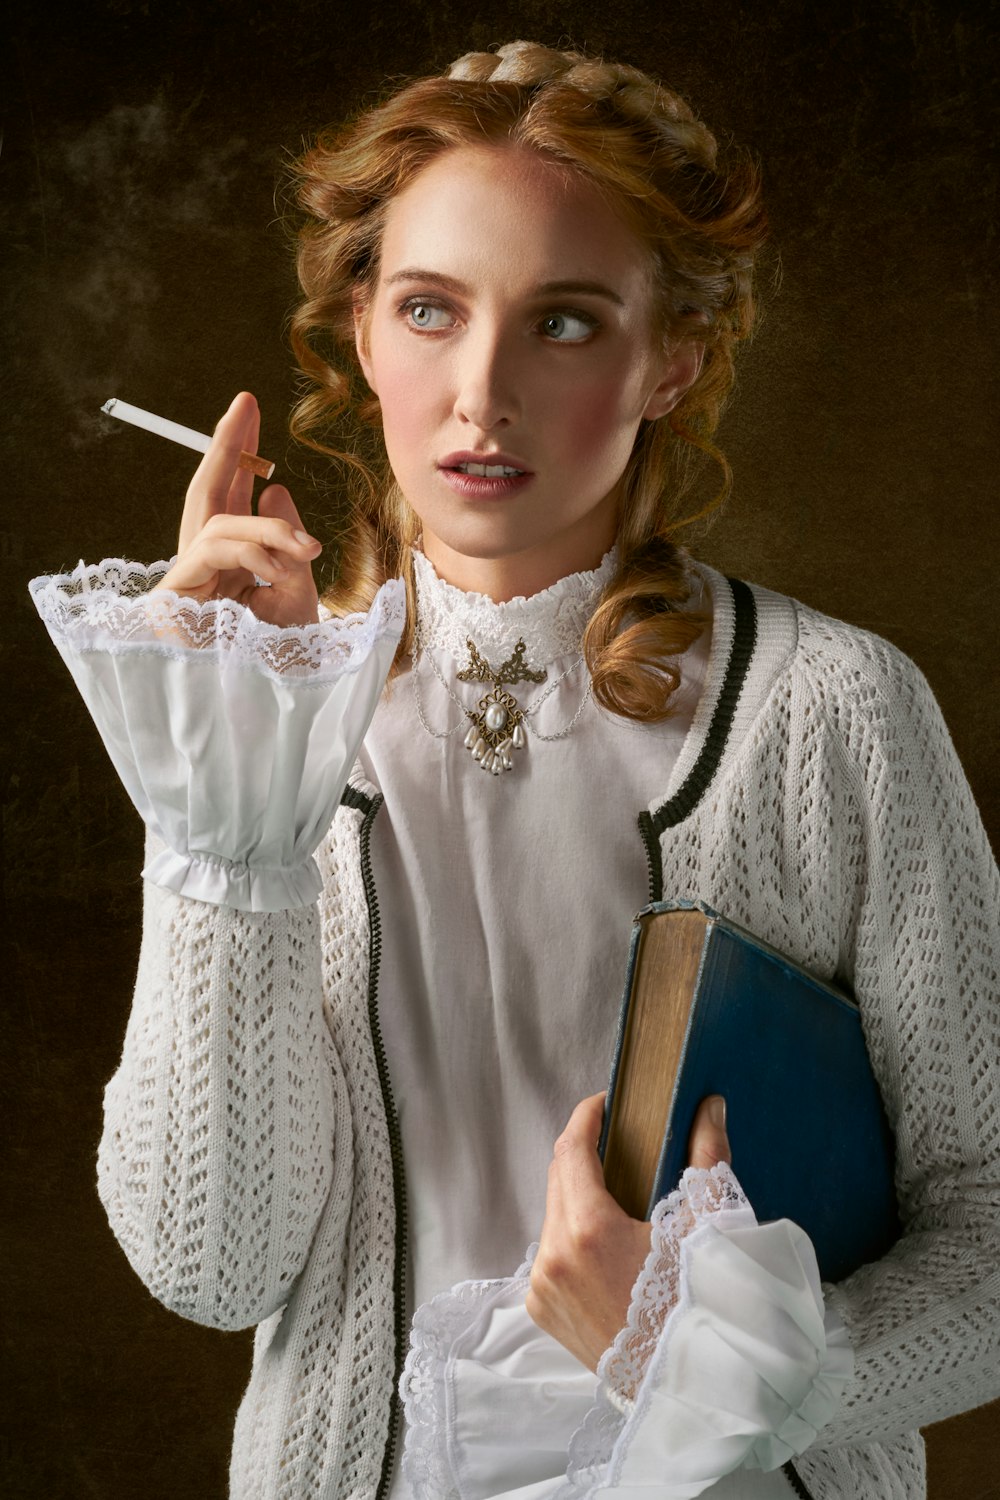 woman with cigarette holding book photo